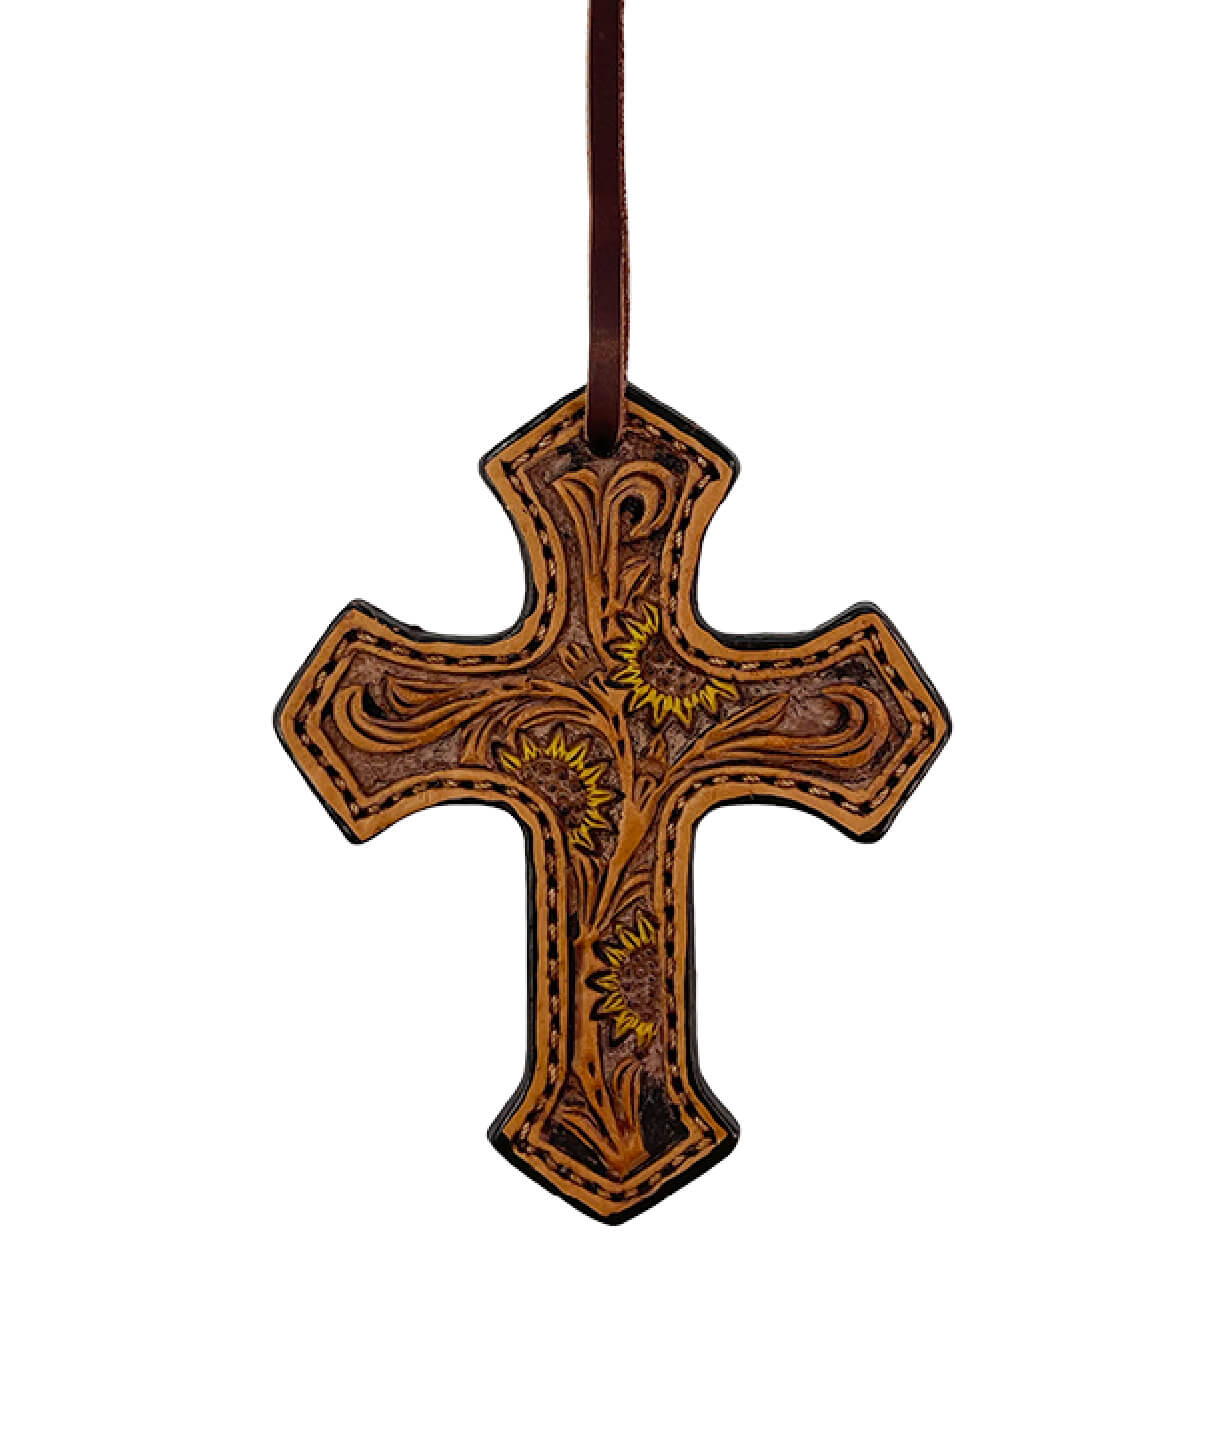 Cross golden leather sunflower tooling with brown background paint and an antique finish.